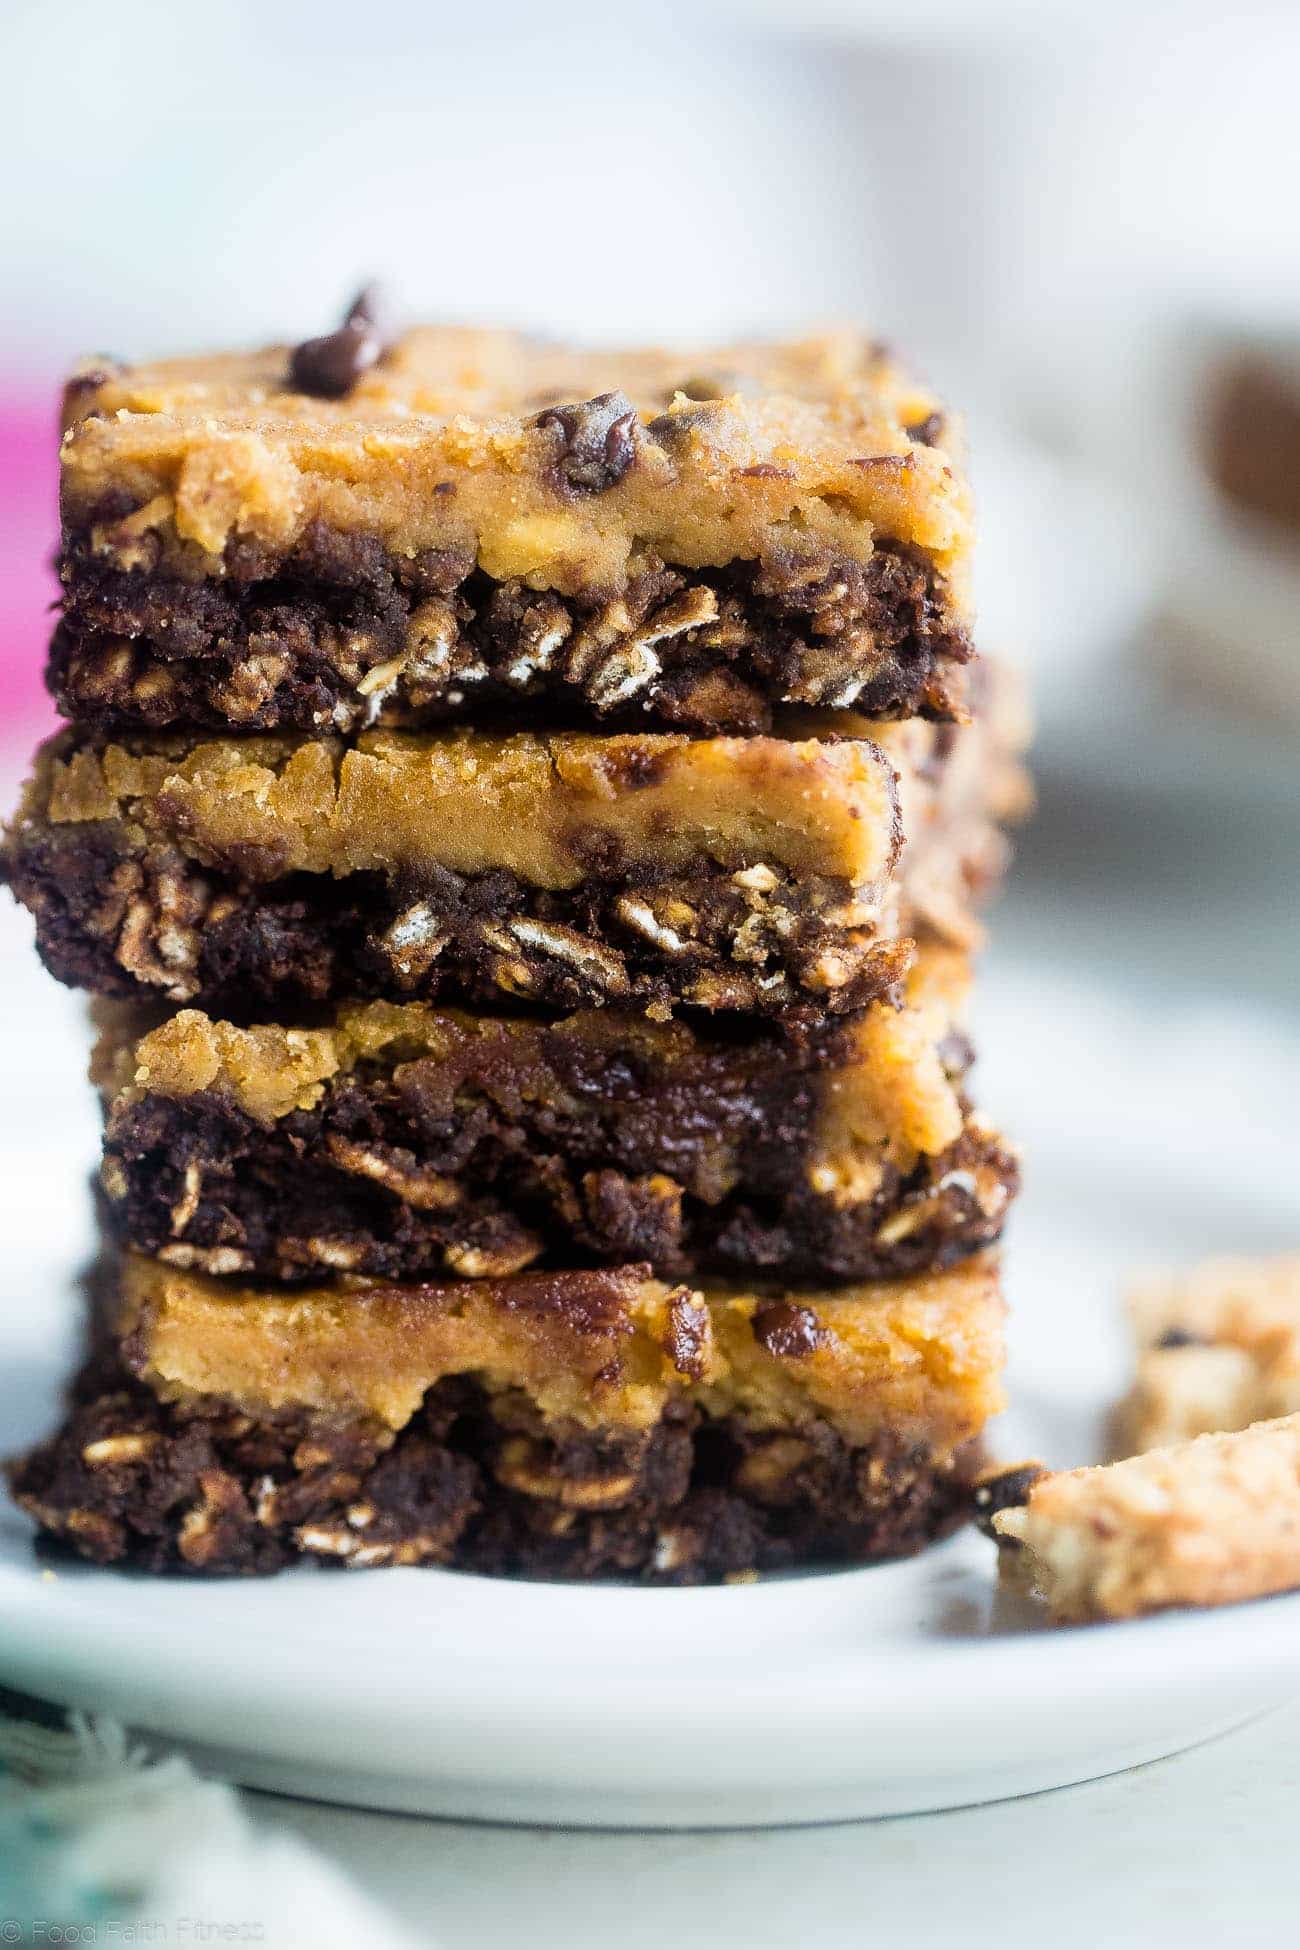 Vegan Cookie Dough Oatmeal Breakfast Bars - These gluten free breakfast bars let you feel like you're having dessert for breakfast! They're an easy, portable option to have for busy mornings! Great for meal prep! | Foodfaithfitness.com | @FoodFaithFit